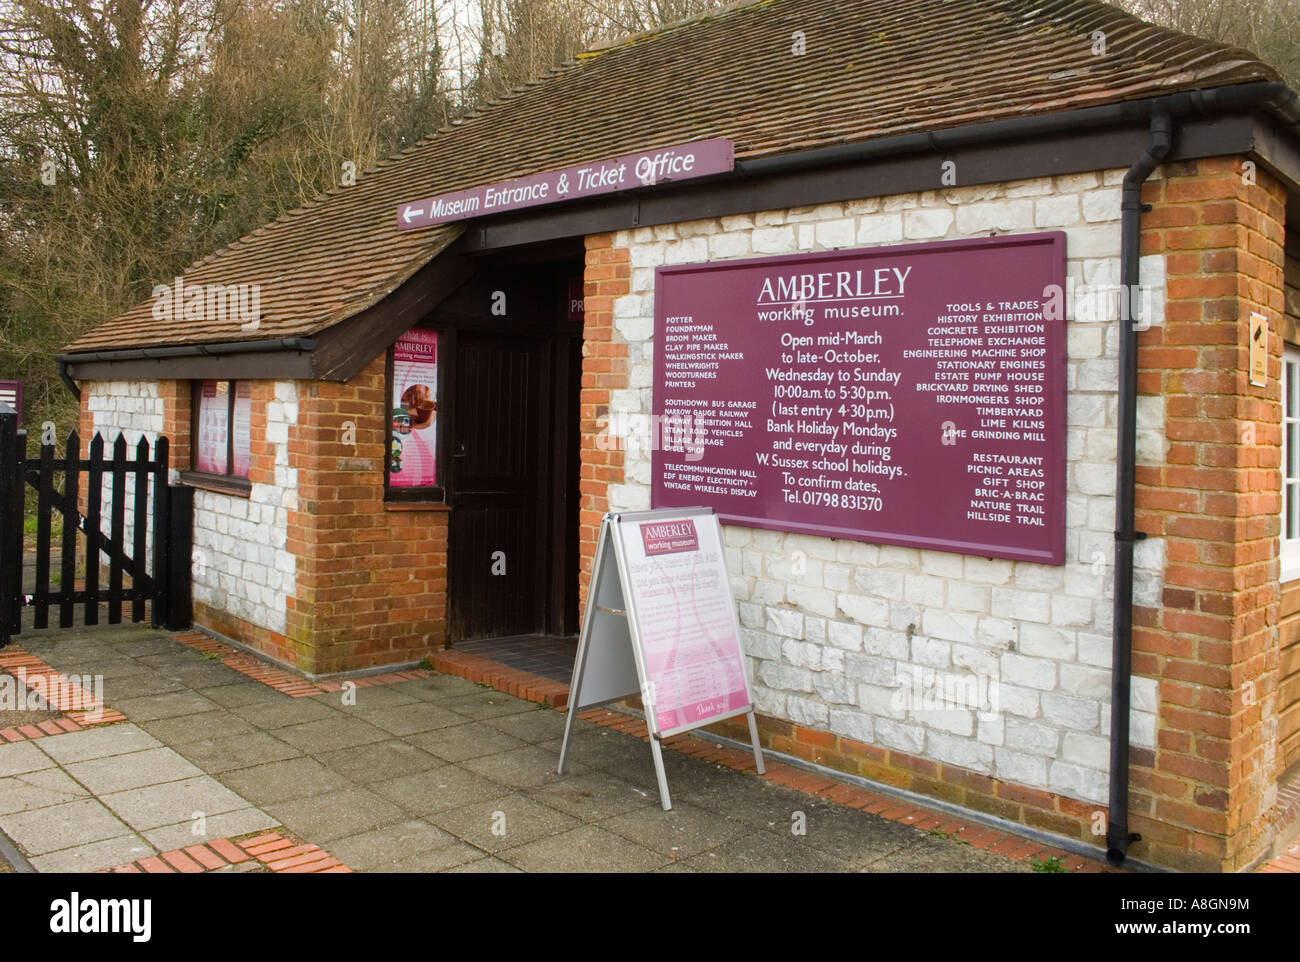 Amberley Working Museum, South Downs, West Sussex, Regno Unito Foto Stock